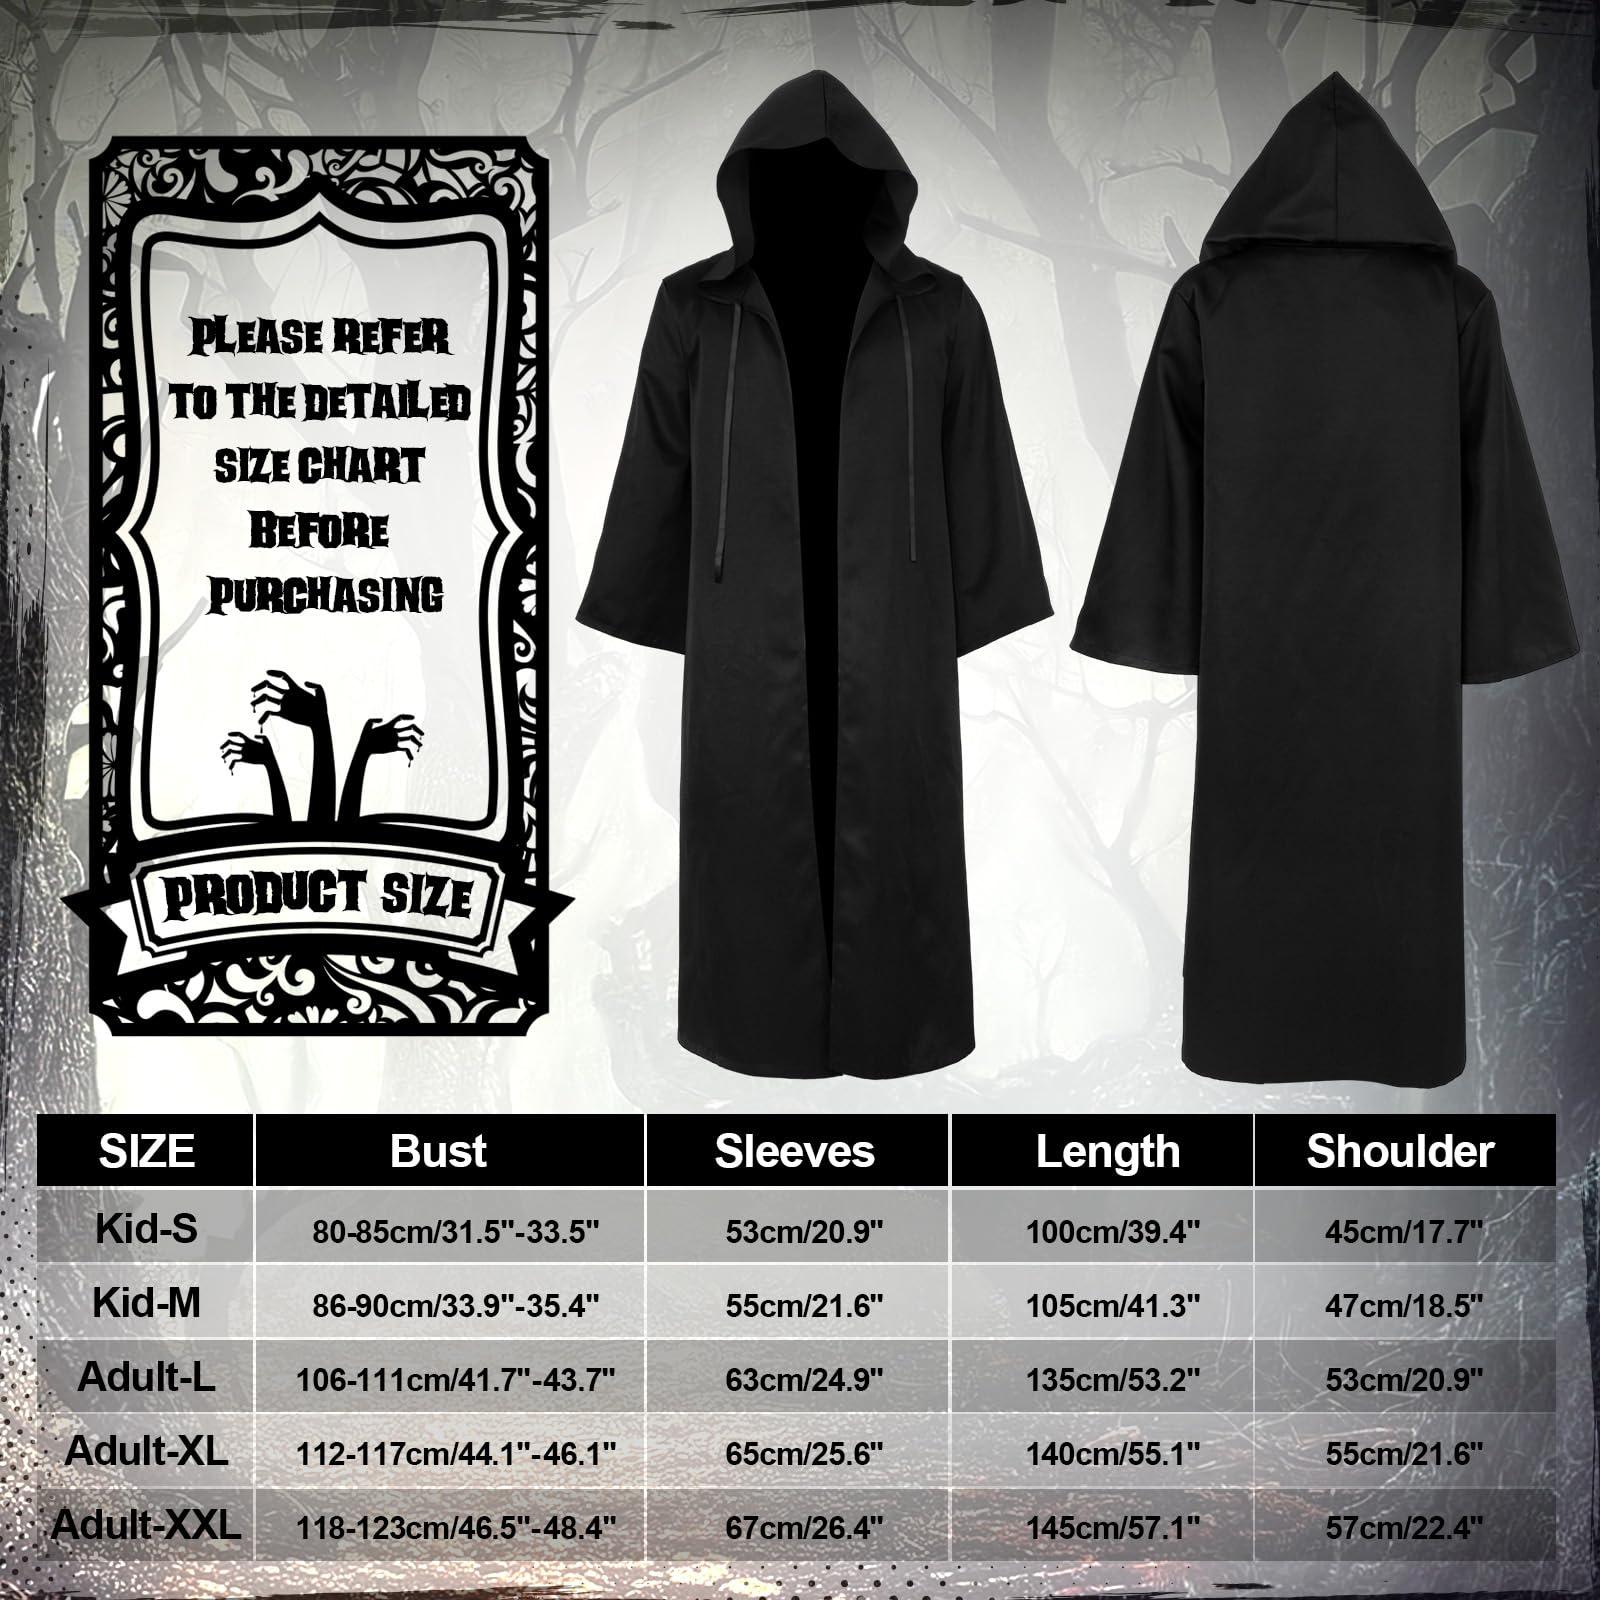 Hicarer Hooded Robe Cloak for Men Kid Halloween Wizard Costume Knight Cosplay Elven Cape Medieval Renaissance Costume (Black,Kid, Small) 1